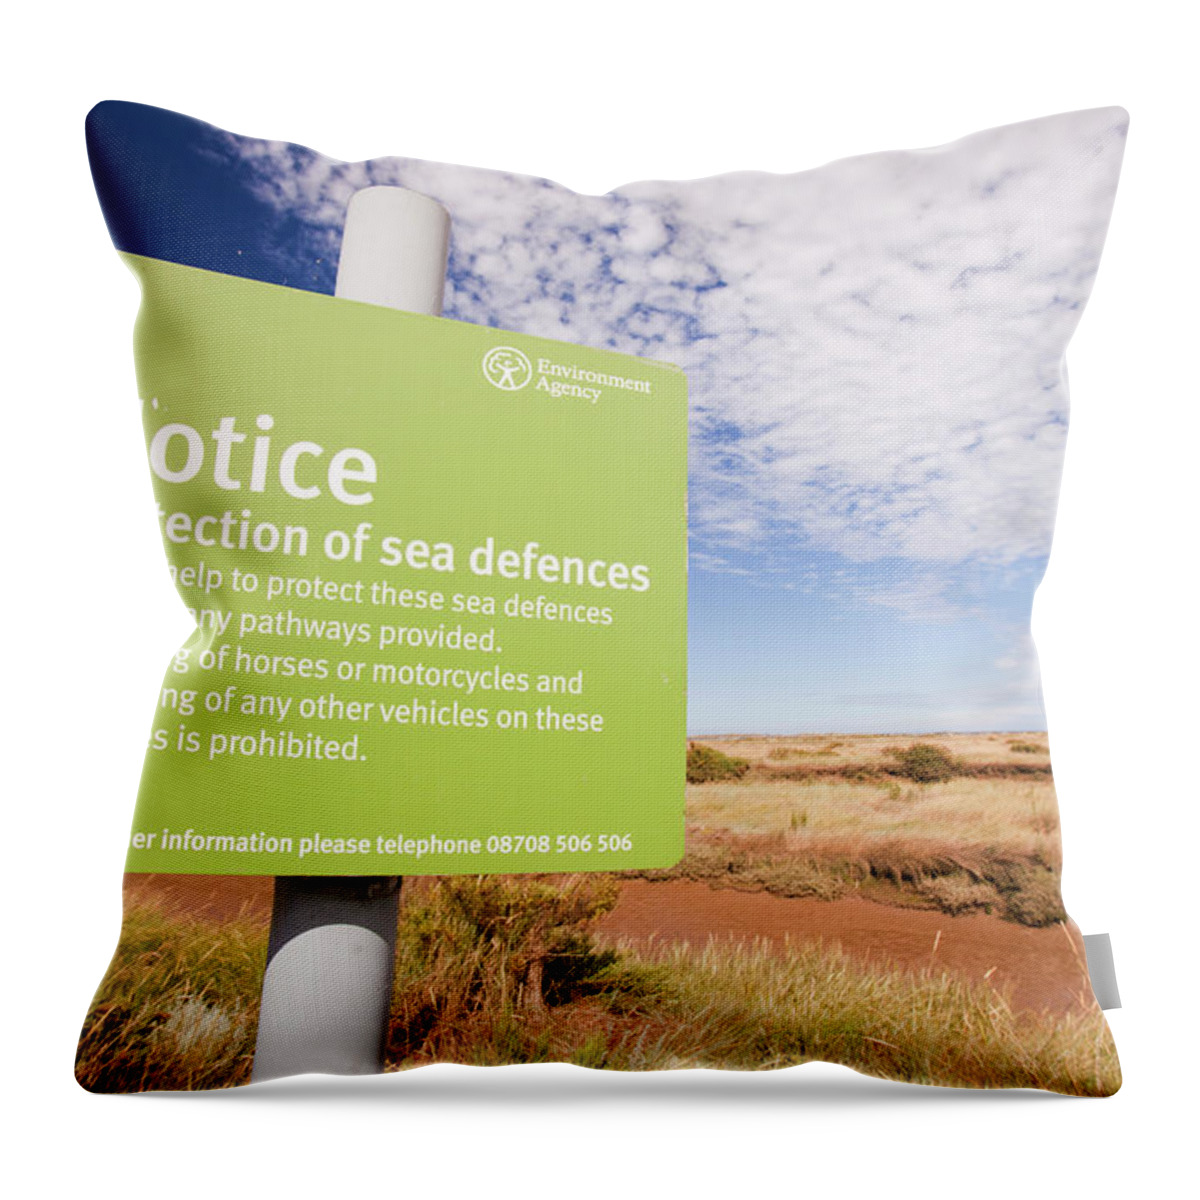 Norfolk Throw Pillow featuring the photograph Warning Sign Regarding Protection by Ashley Cooper